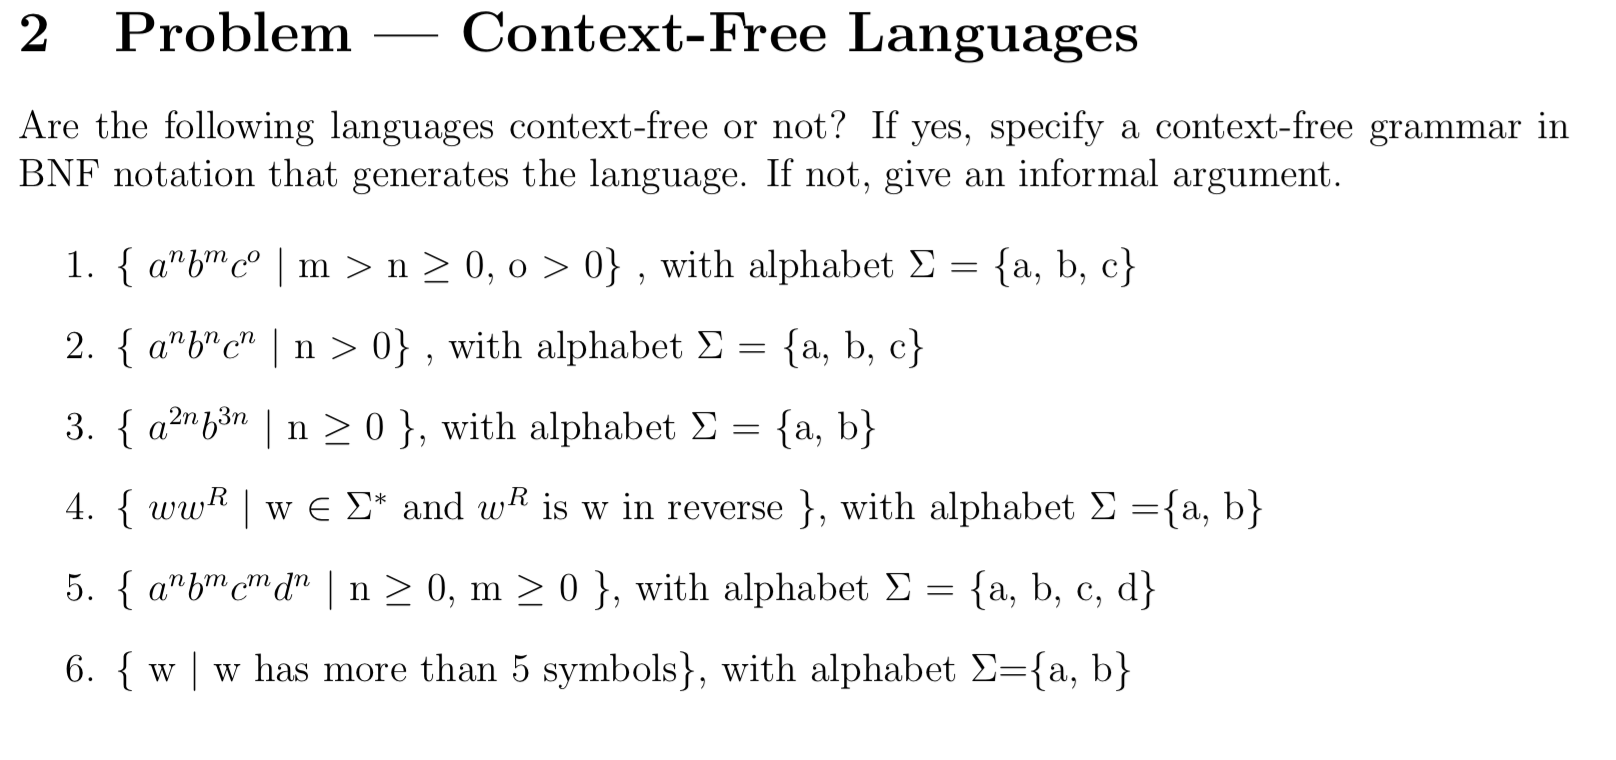 find context-free grammars for the following languages l w